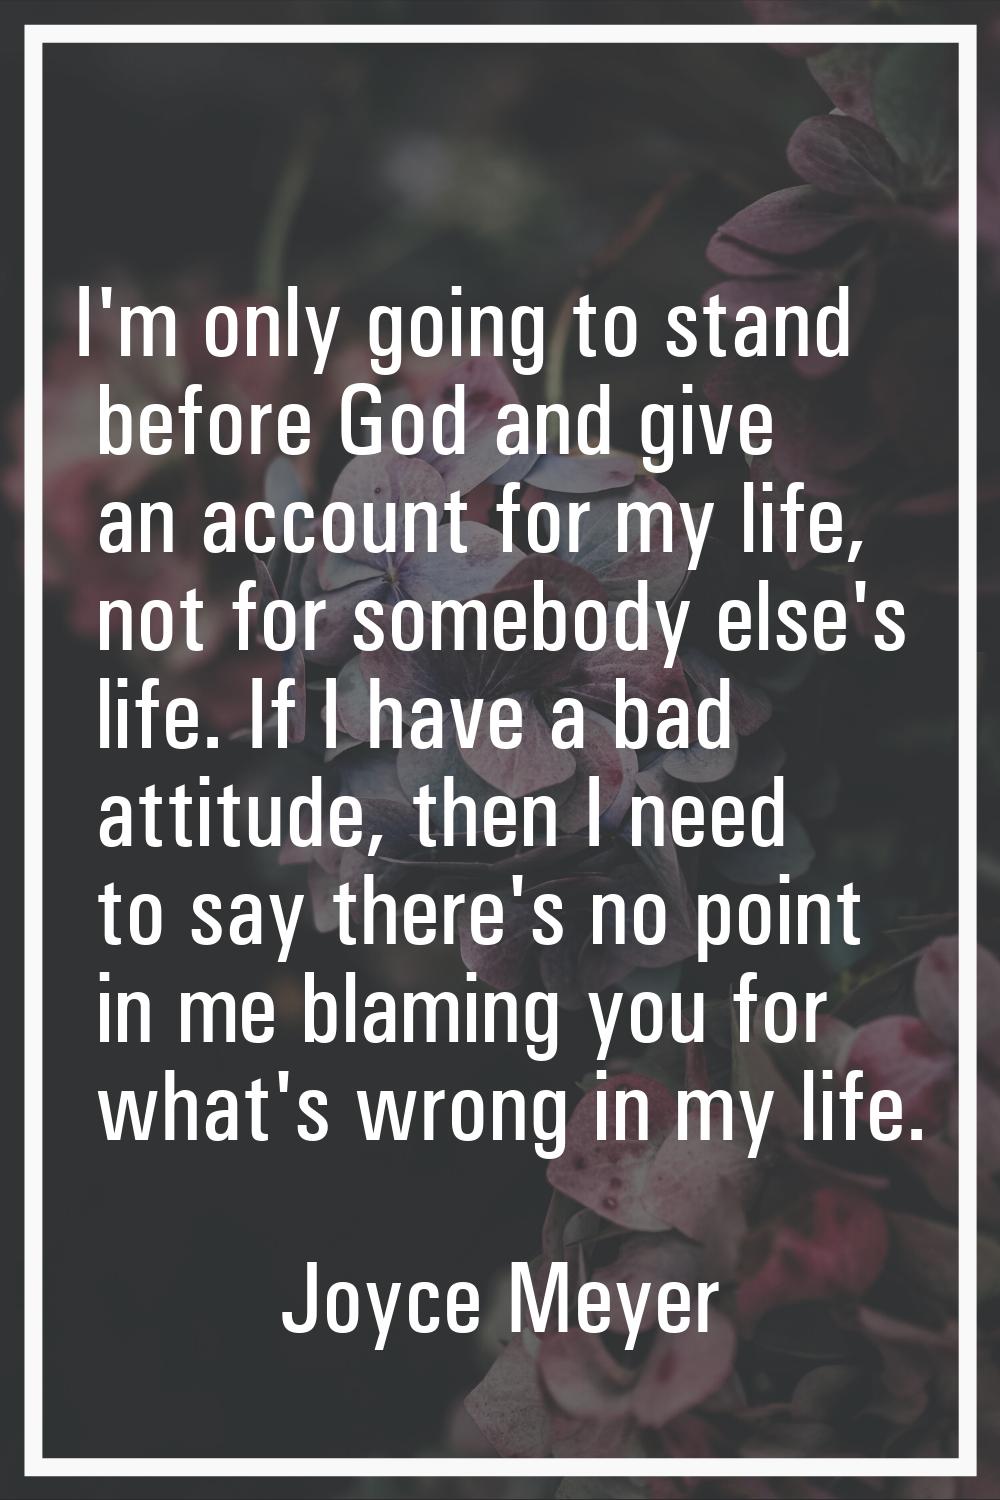 I'm only going to stand before God and give an account for my life, not for somebody else's life. I